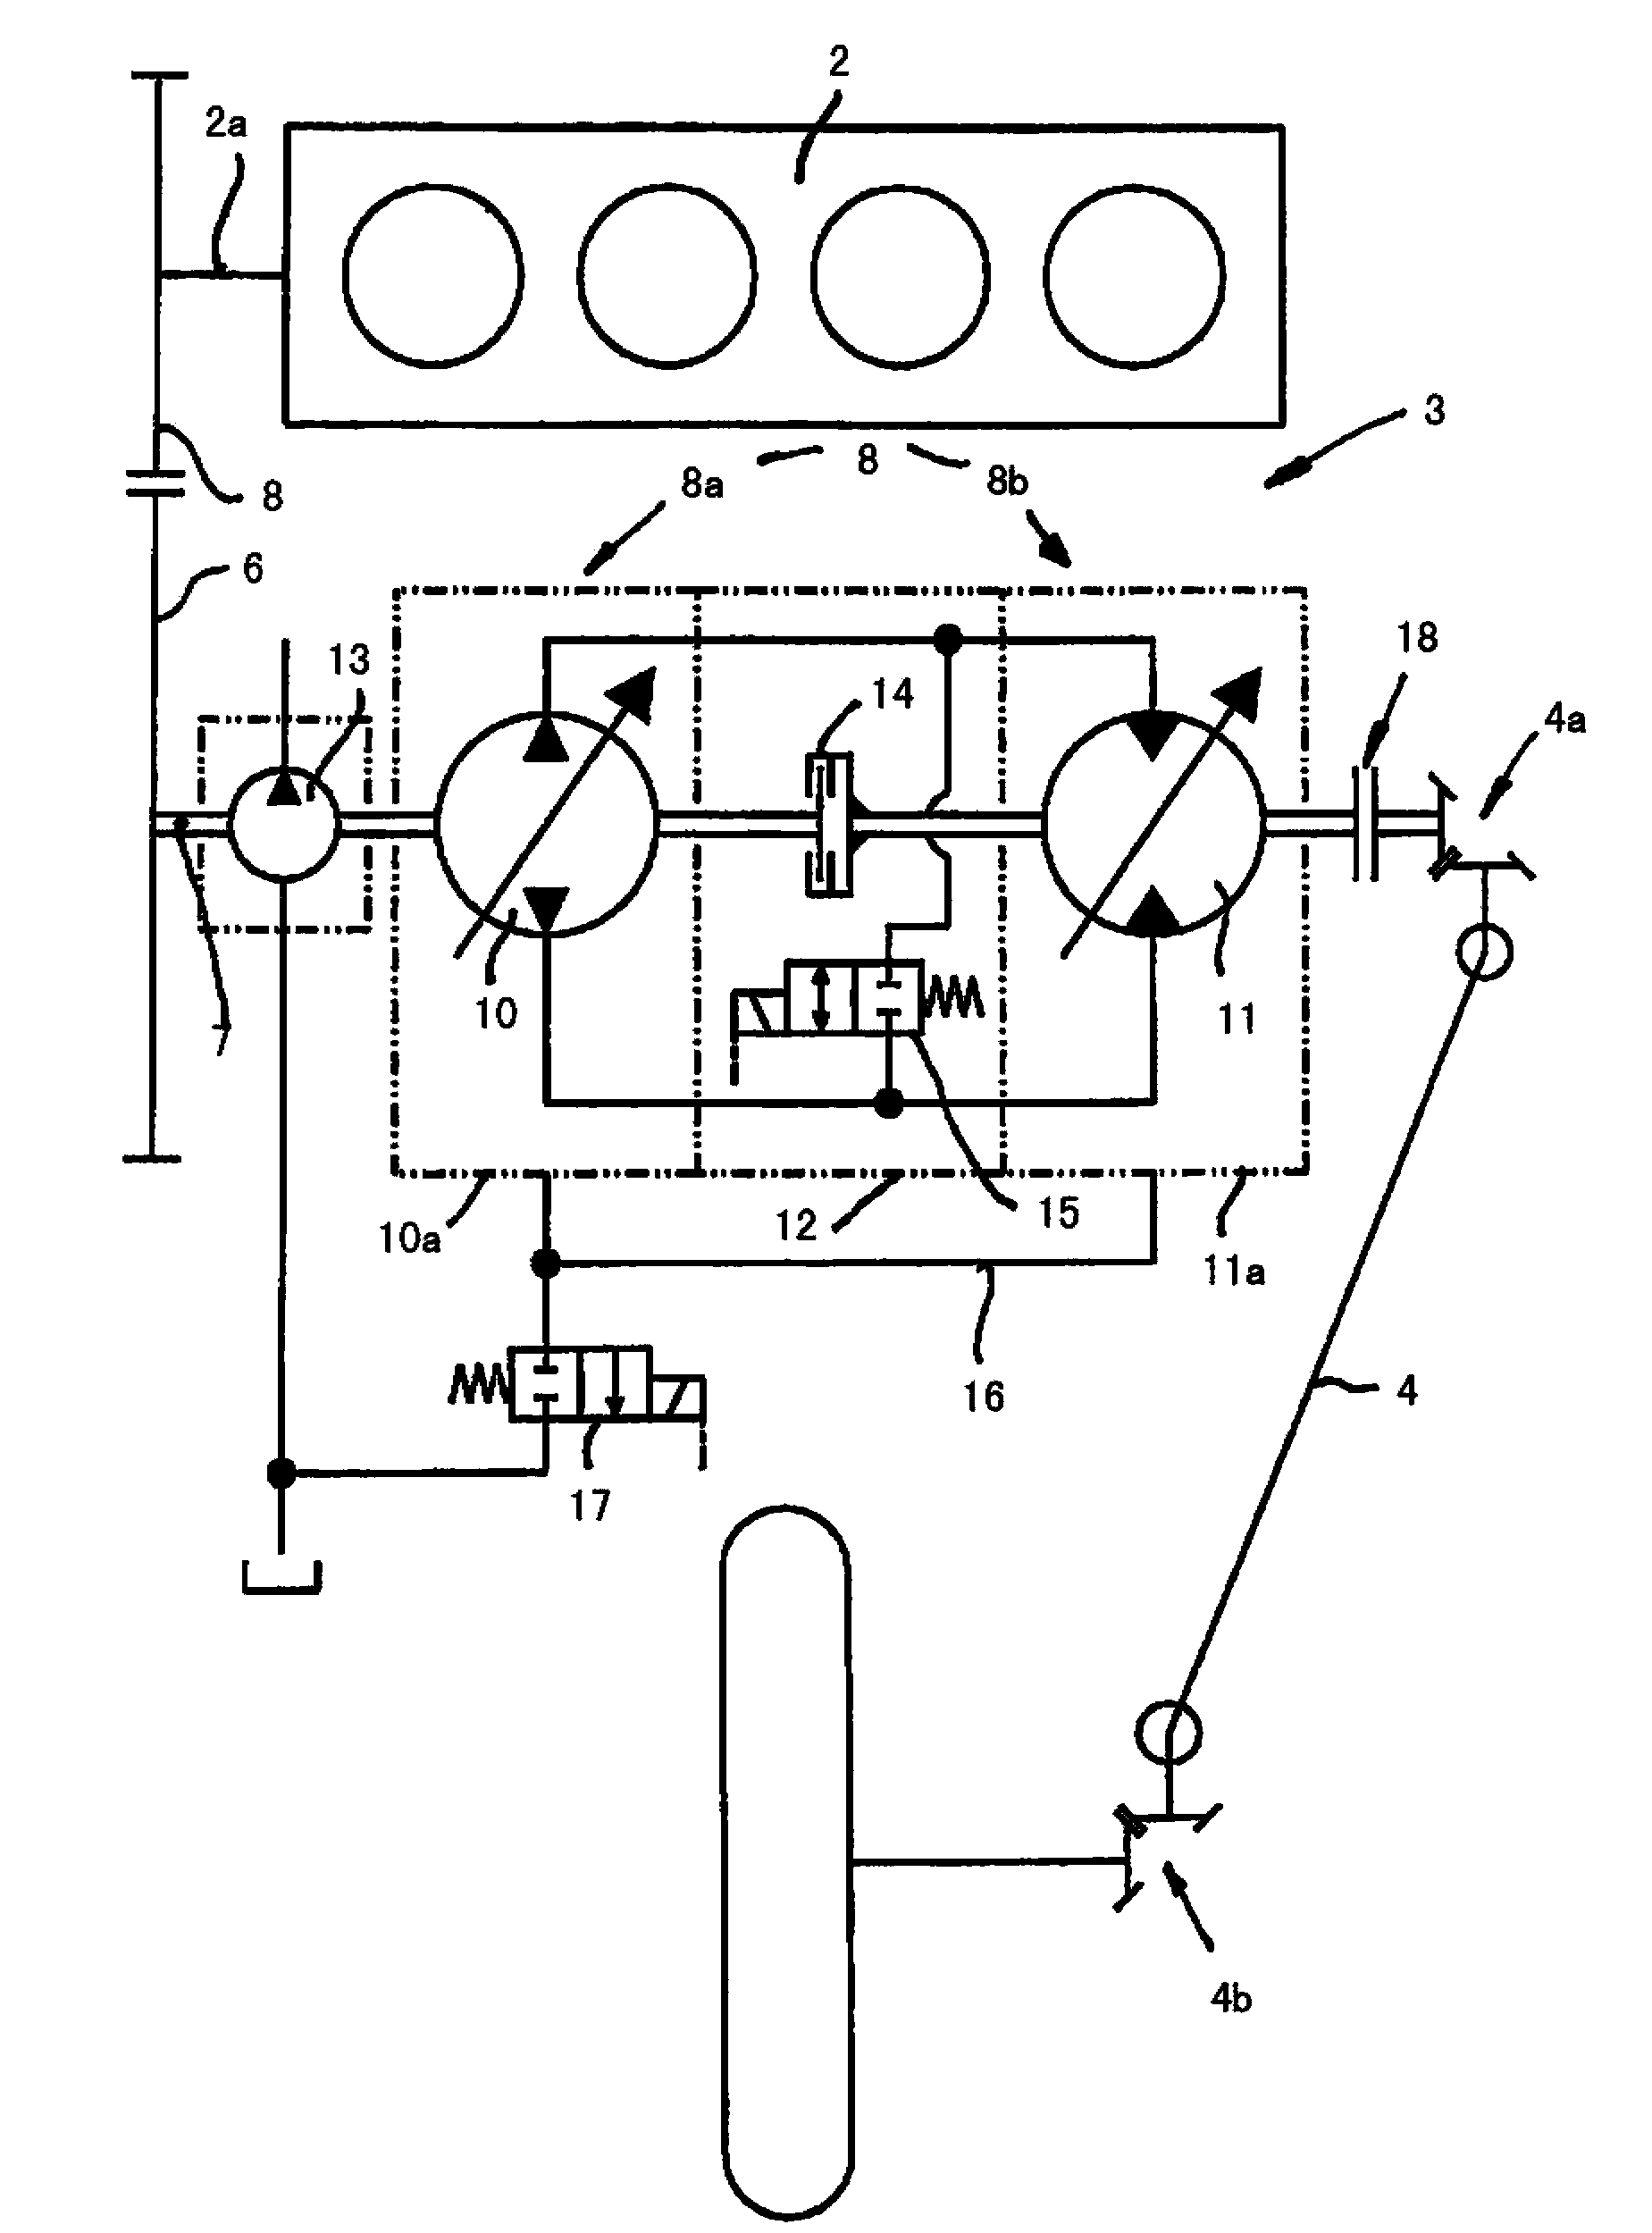 Power assembly system with internal combustion engine and continuously variable transmission